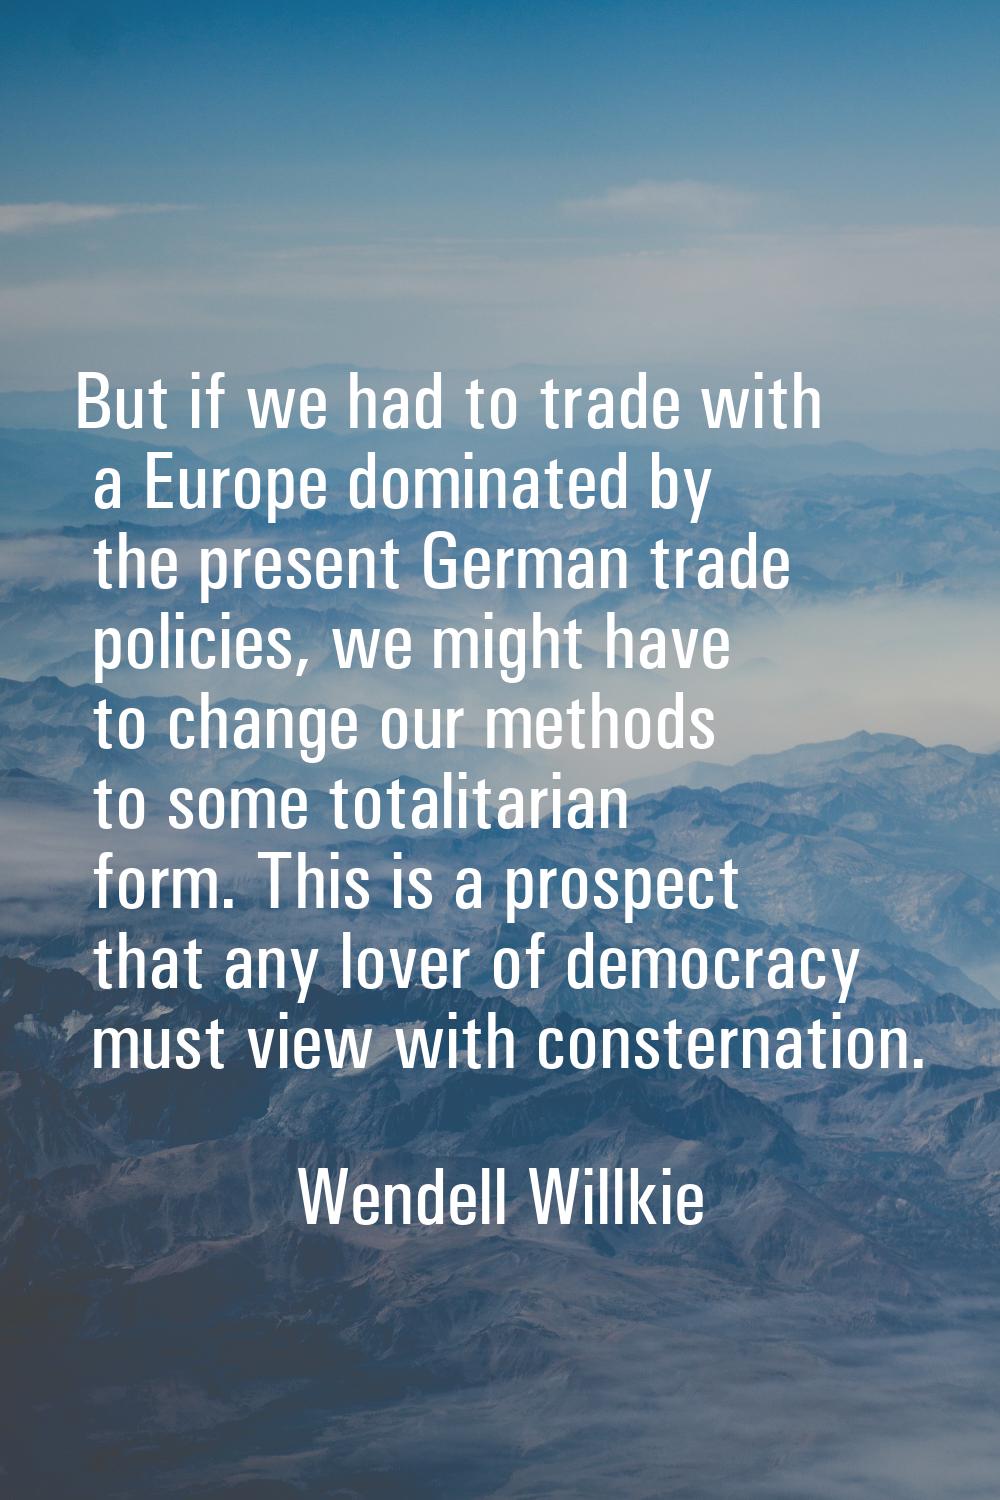 But if we had to trade with a Europe dominated by the present German trade policies, we might have 